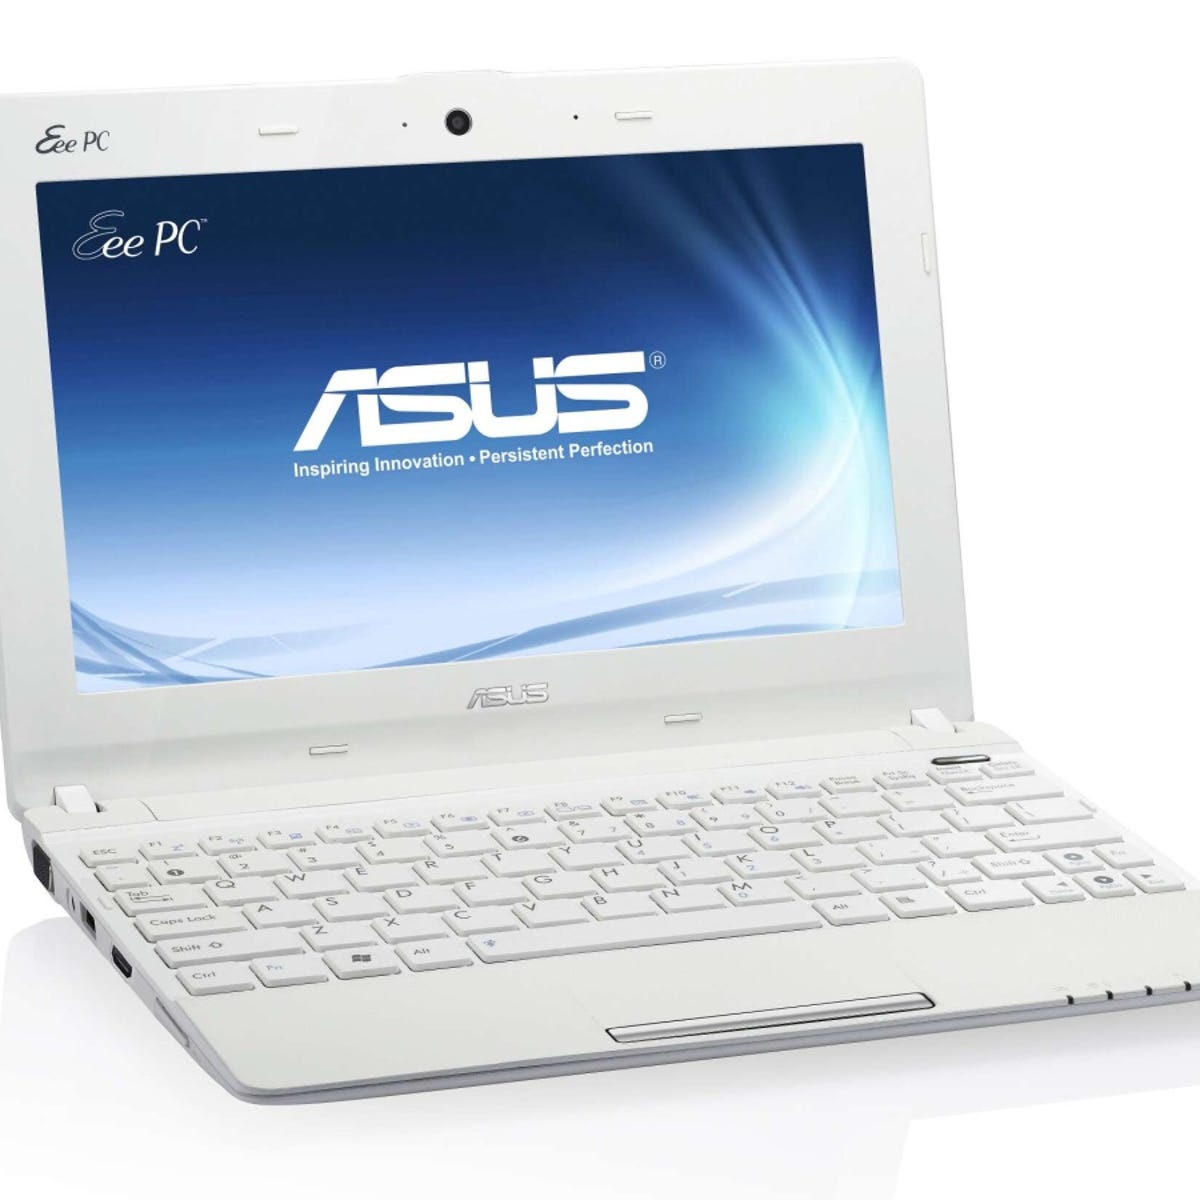 Ja Controversieel droom Asus Eee PC X101CH review: Asus Eee PC X101CH - CNET